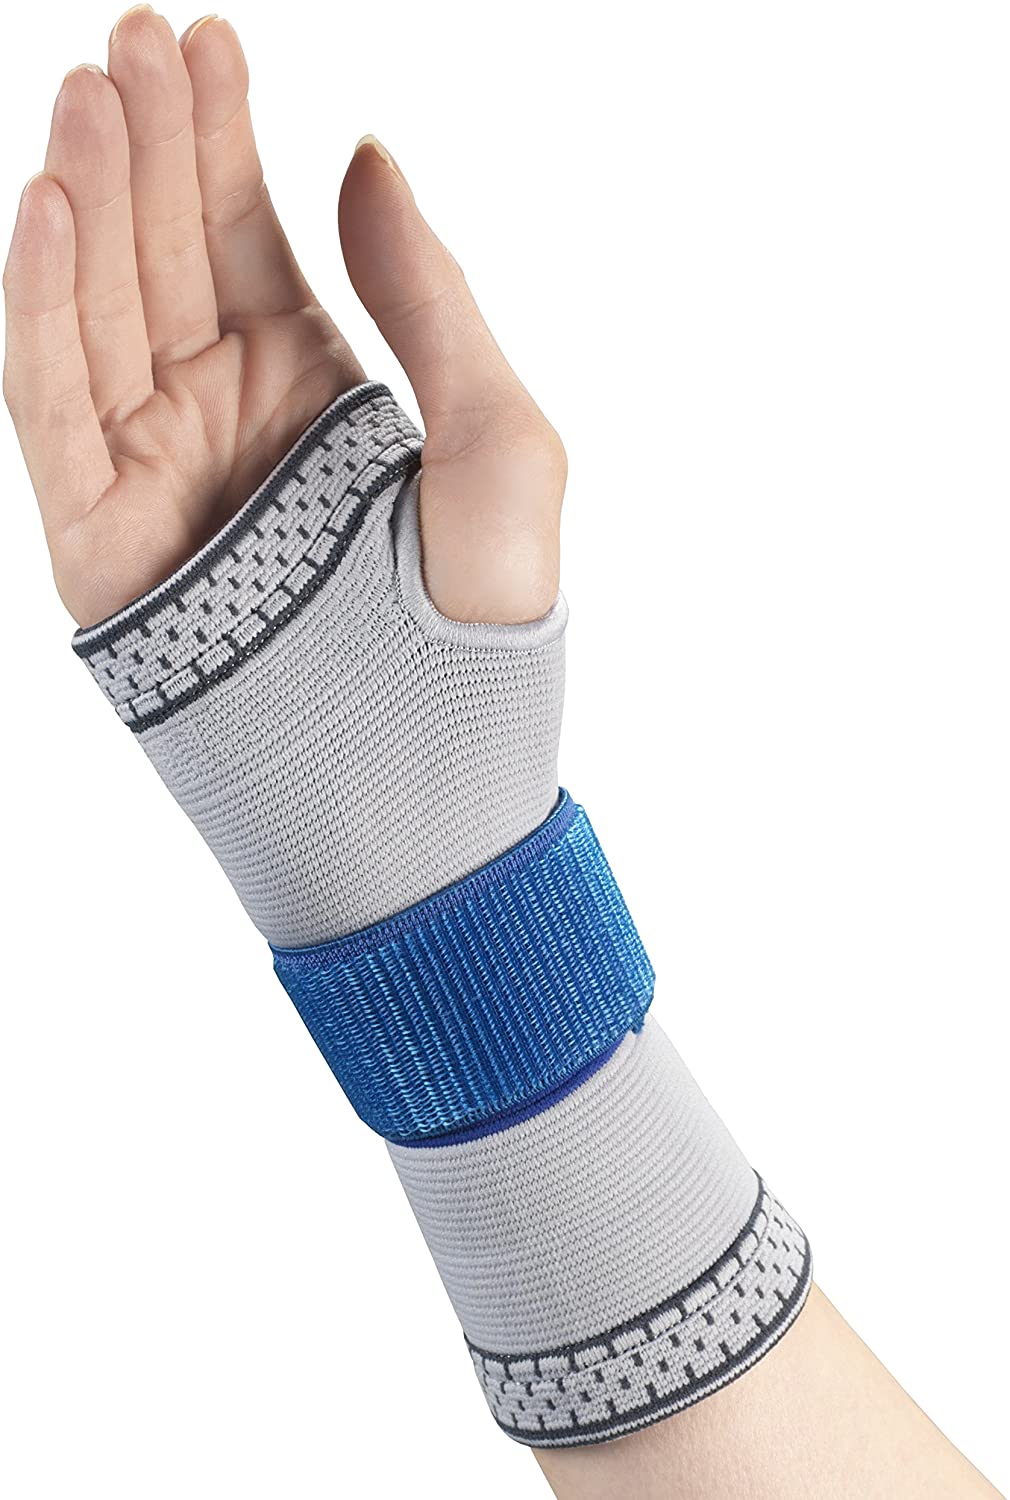 Champion Elastic Wrist Support With Encircling Strap - Midwest DME Supply